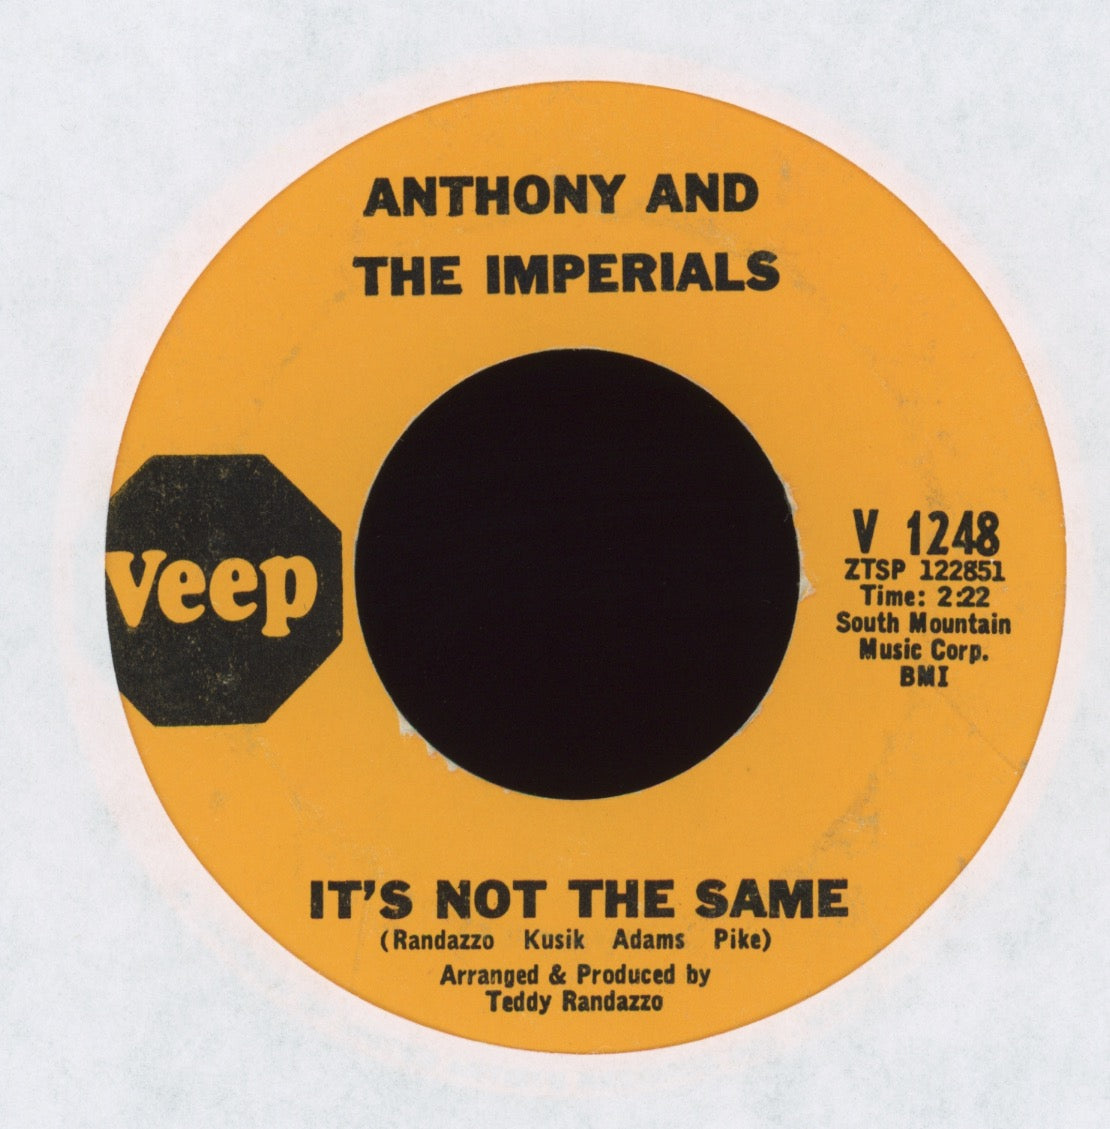 Little Anthony & The Imperials - It's Not The Same on Veep